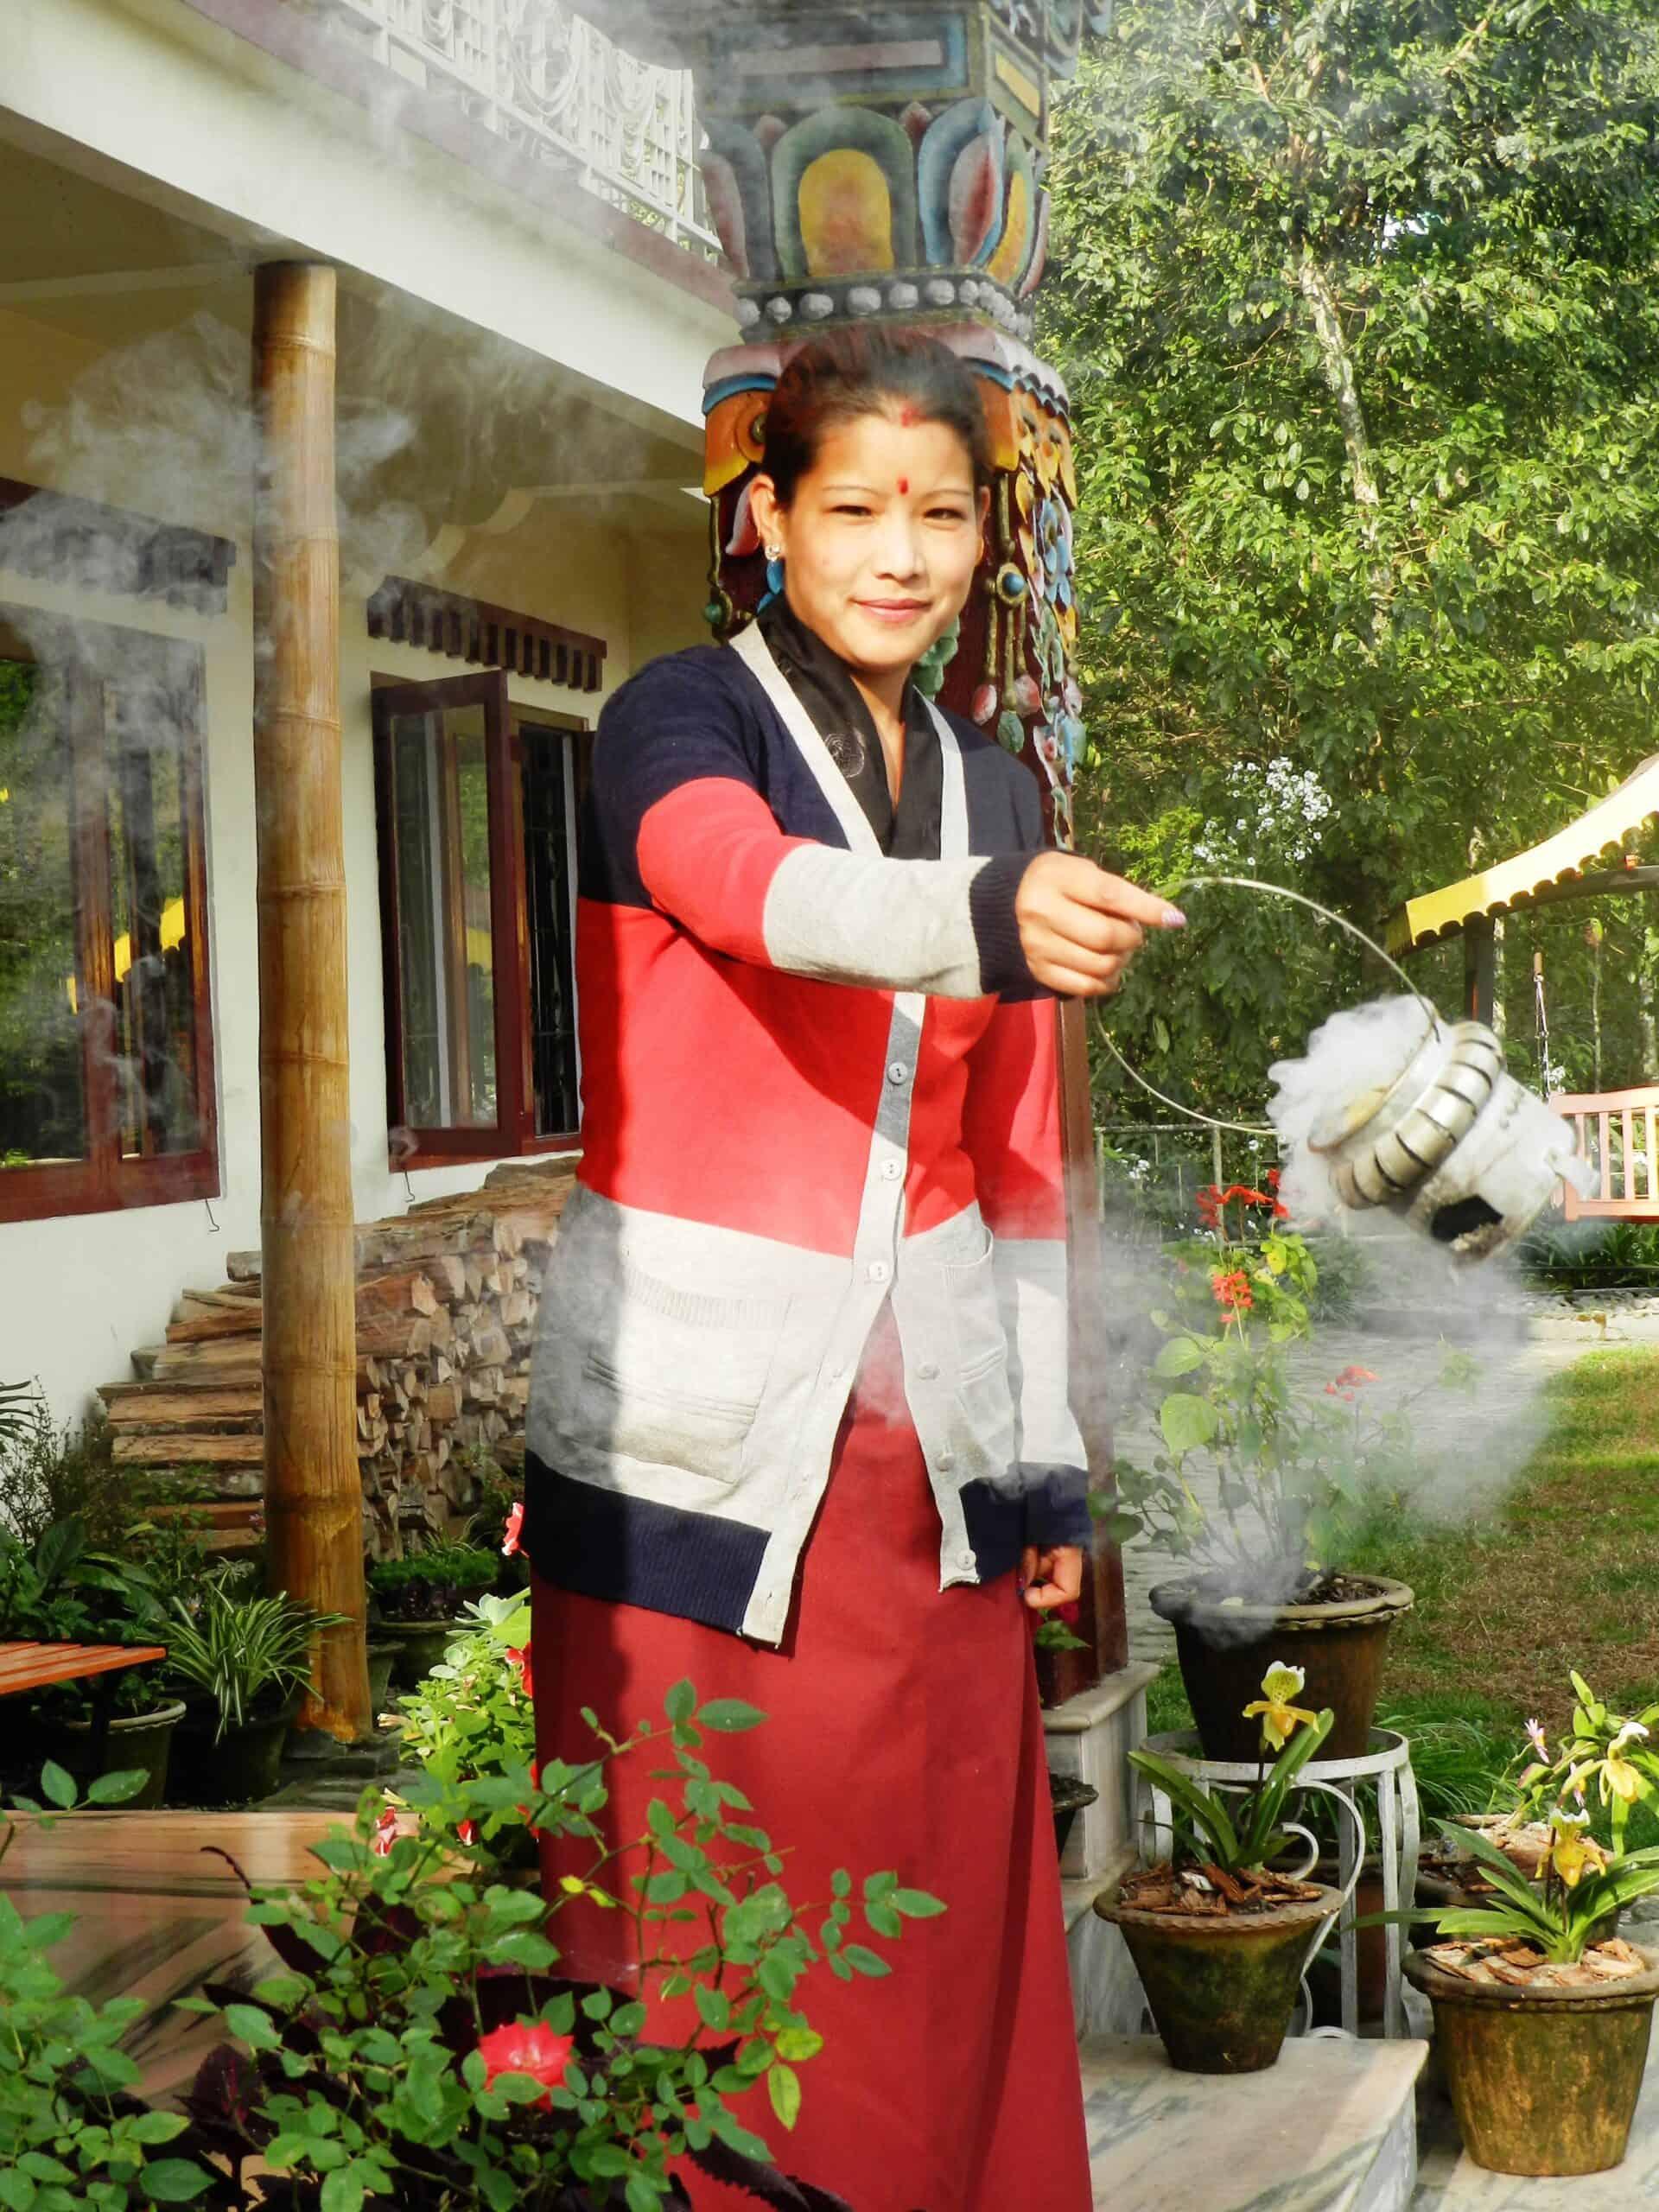 Bamboo Retreat Hotel - image "Sikkim – The scent of traditional cleansing & healing in the Himalaya" 73